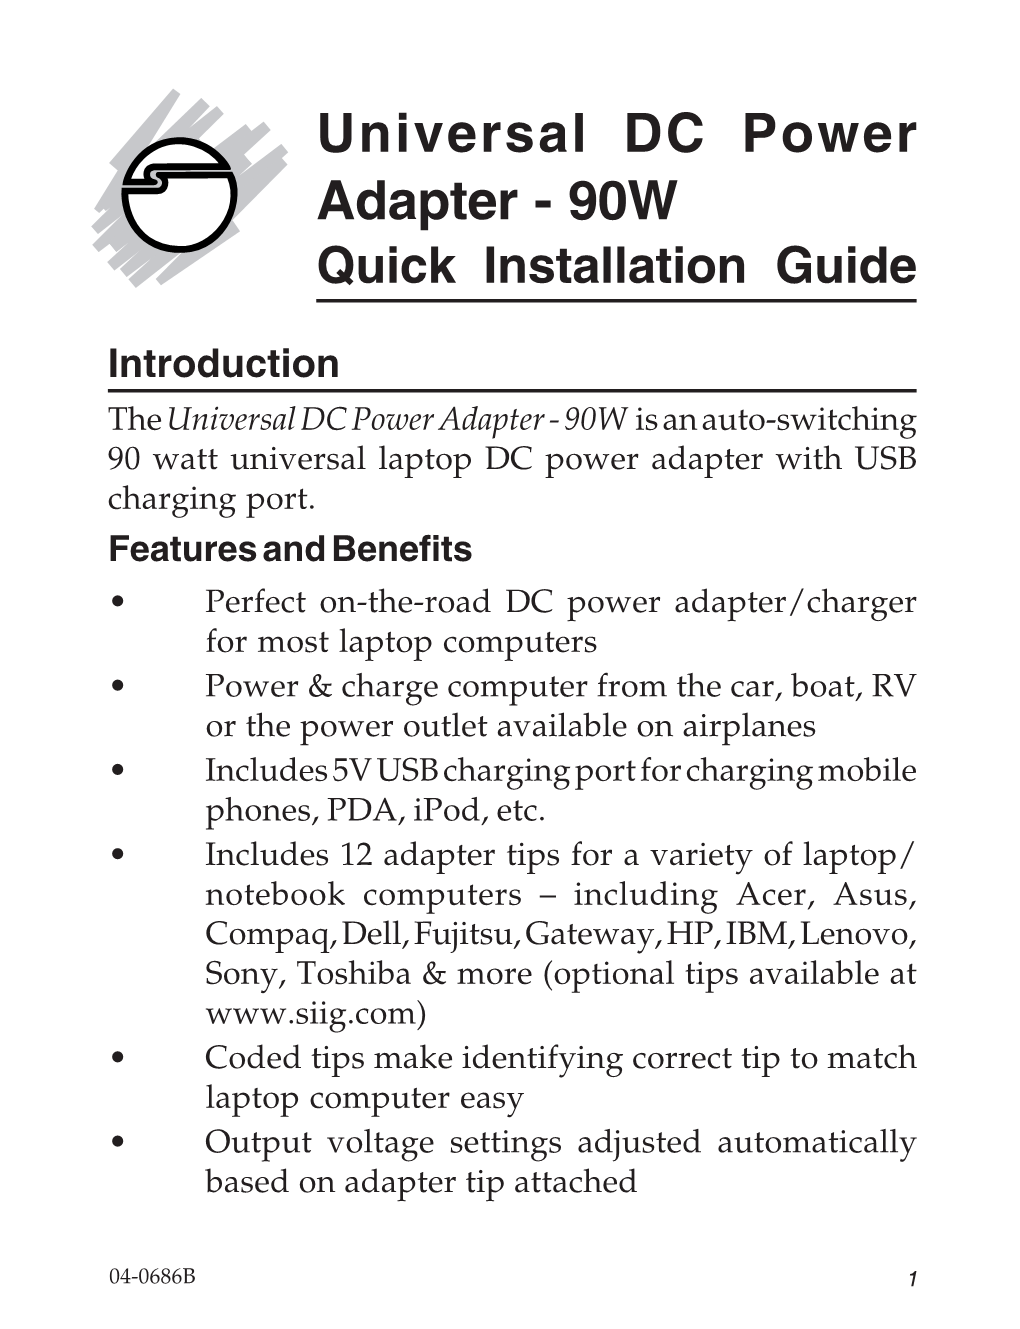 Universal DC Power Adapter - 90W Quick Installation Guide